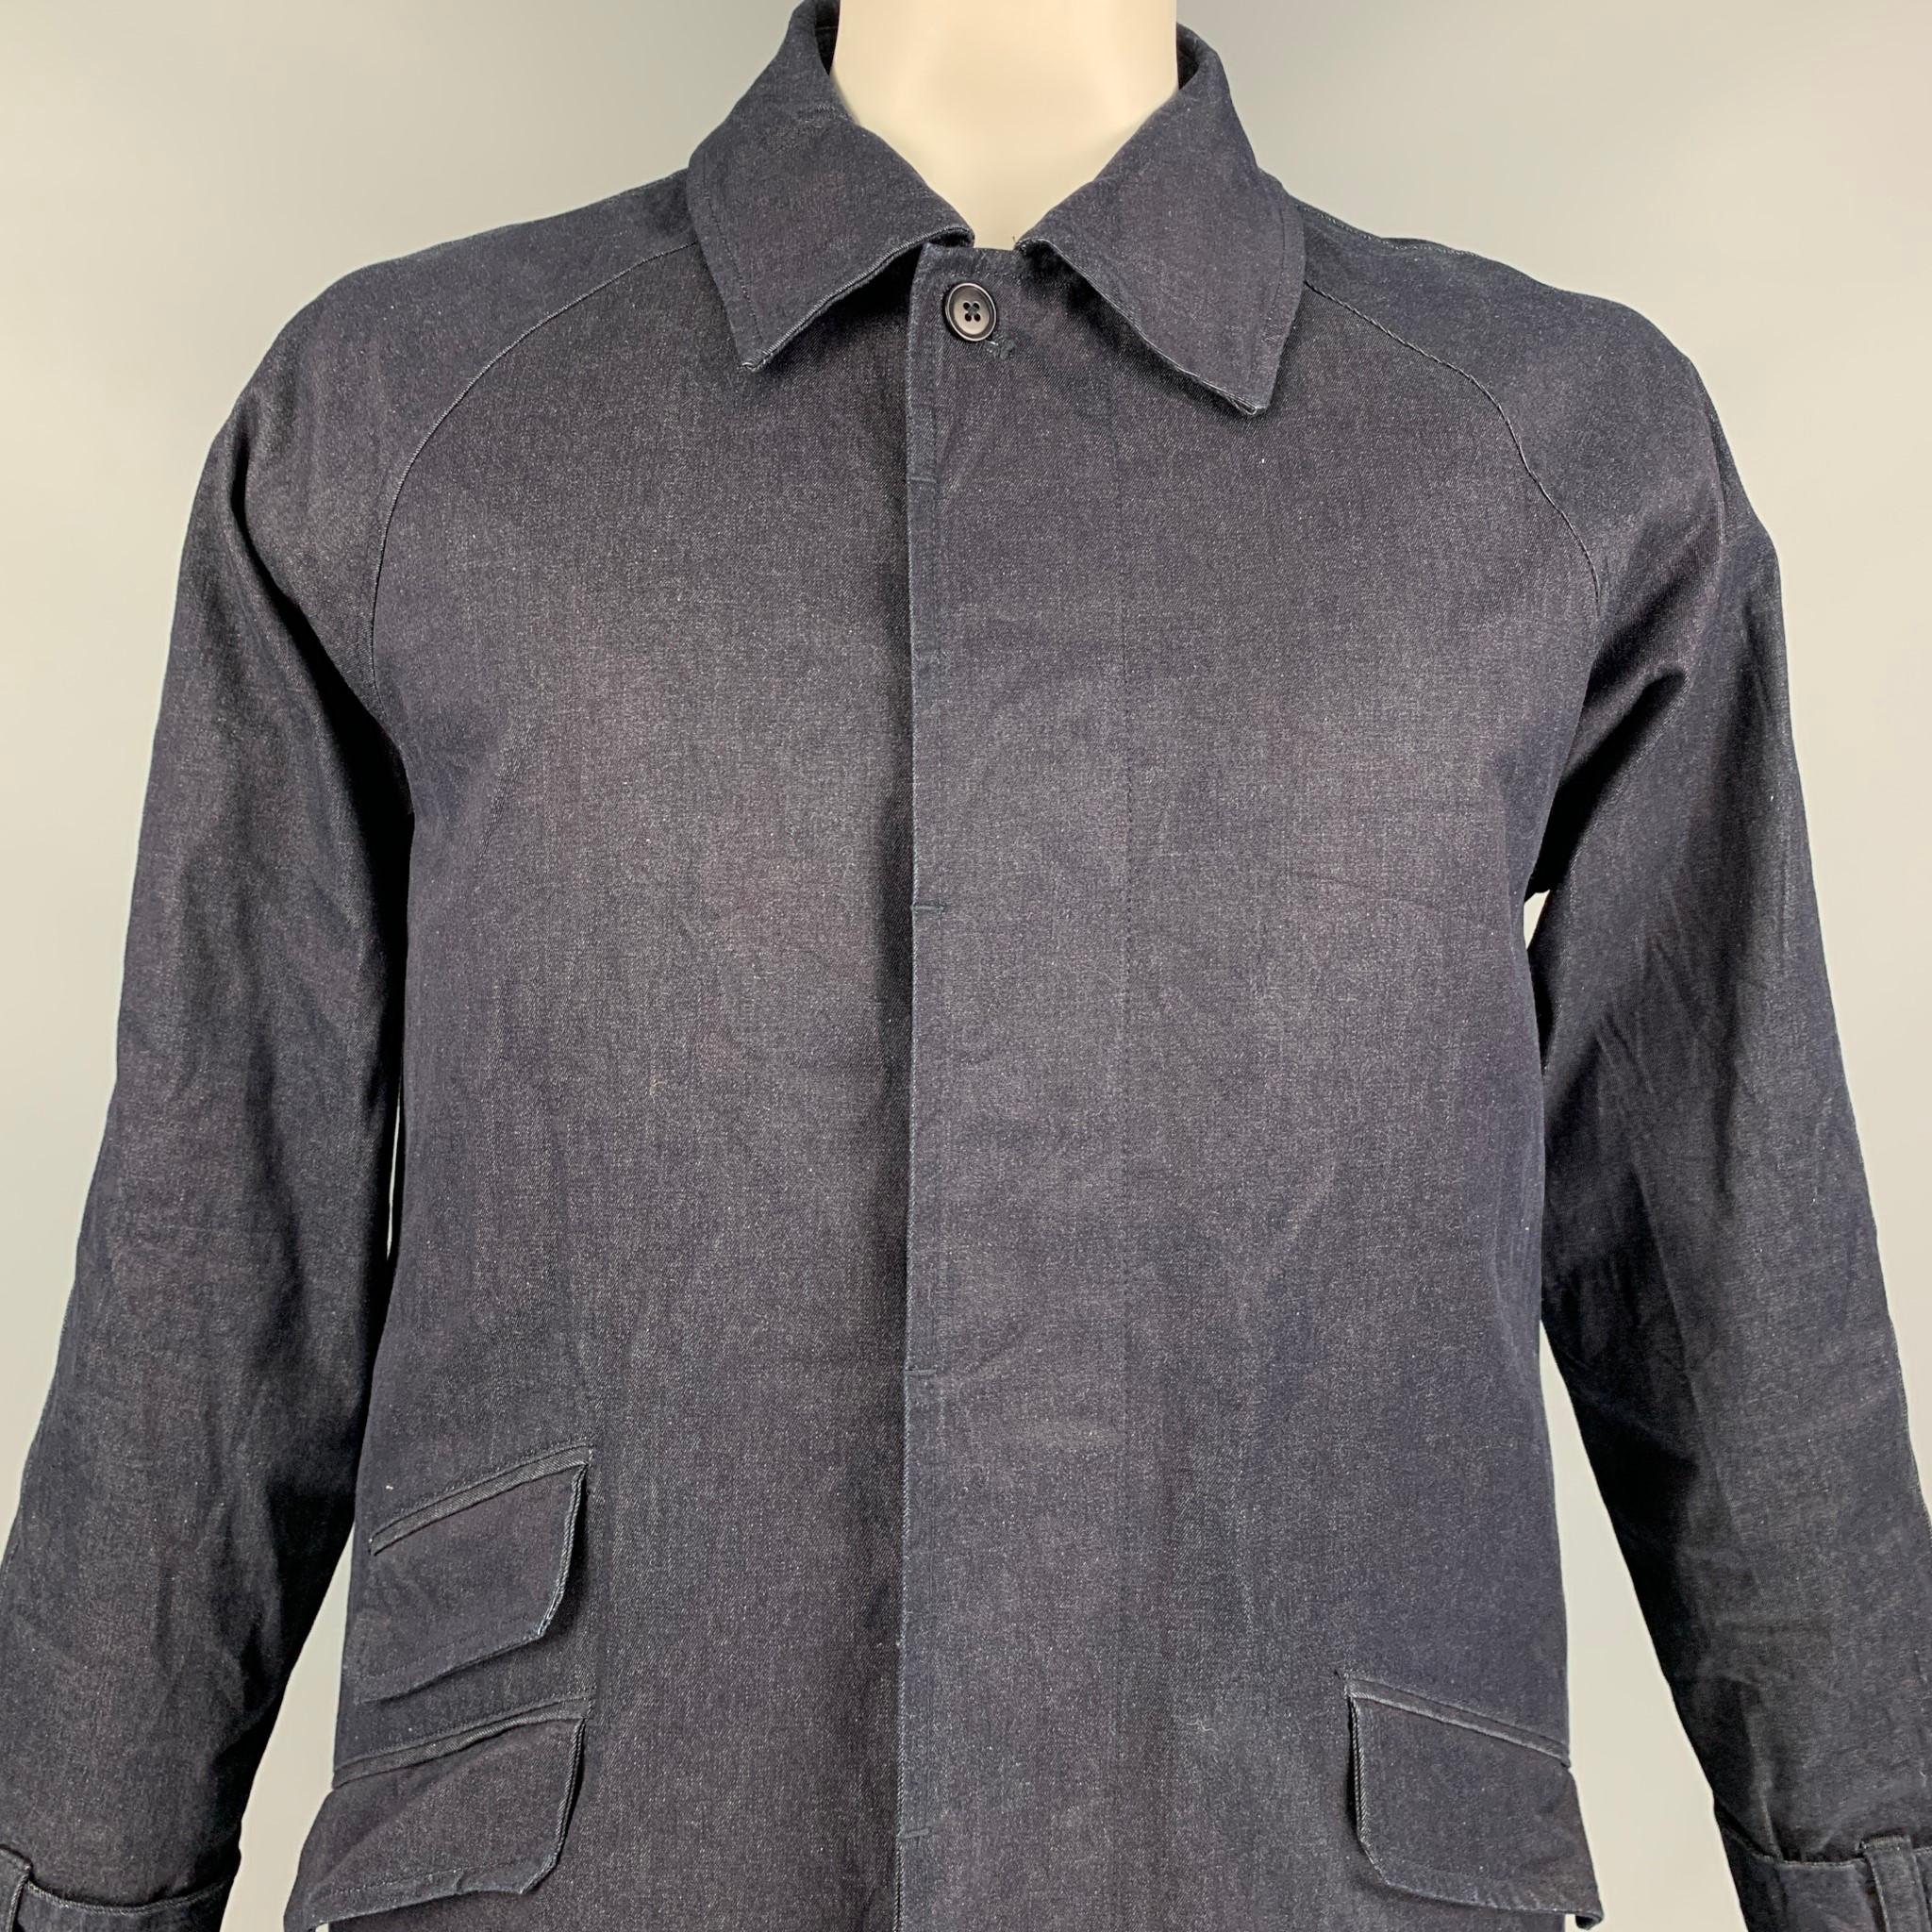 TS (S) coat comes in a indigo cotton / polyurethane with a down fill liner featuring a pointed collar, buttoned sleeves, flap pockets, and a hidden placket closure. Made in Japan. 

Excellent Pre-Owned Condition.
Marked: 4

Measurements:

Shoulder: